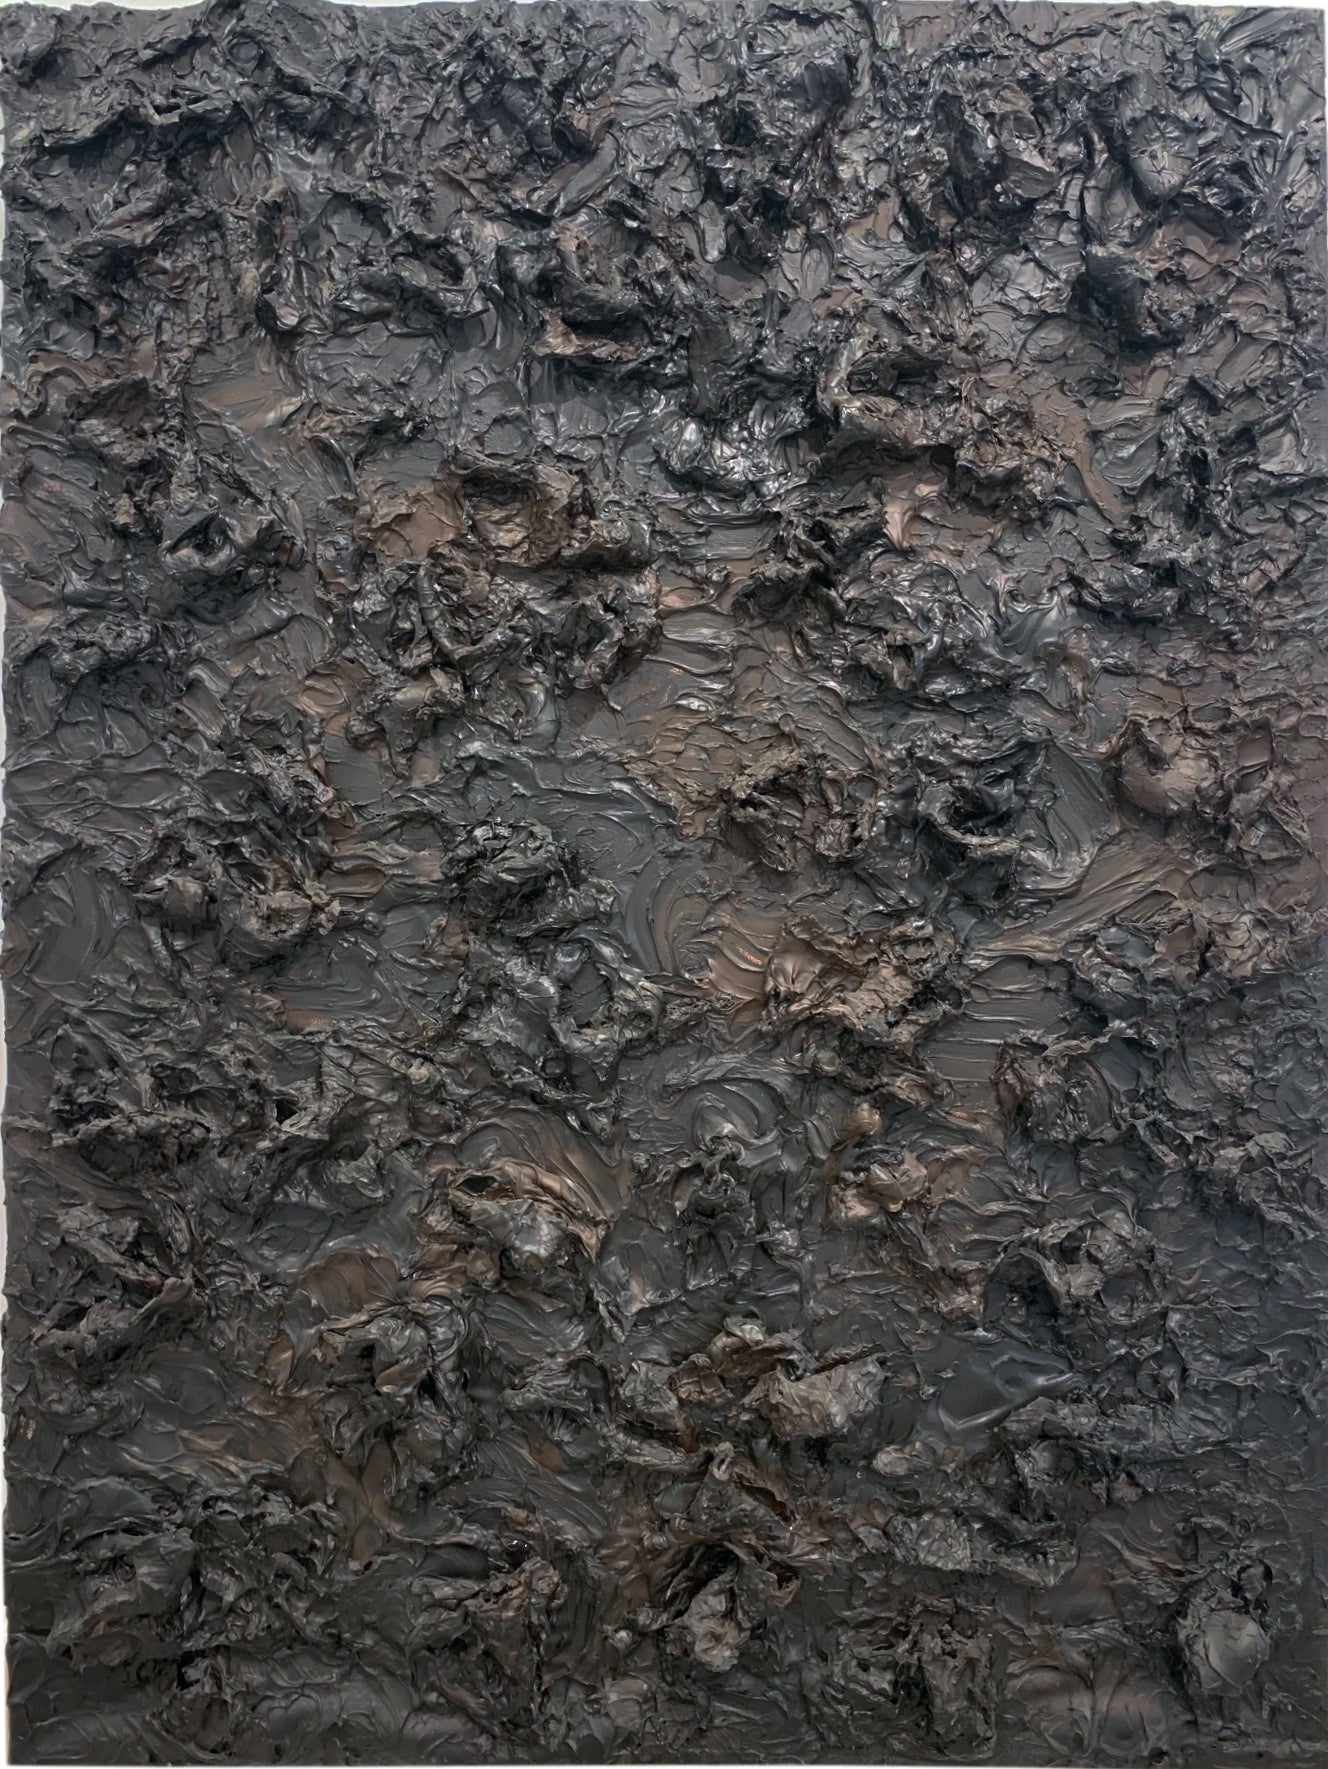 In Search of the World (Black, Brown, Knarly), 1989